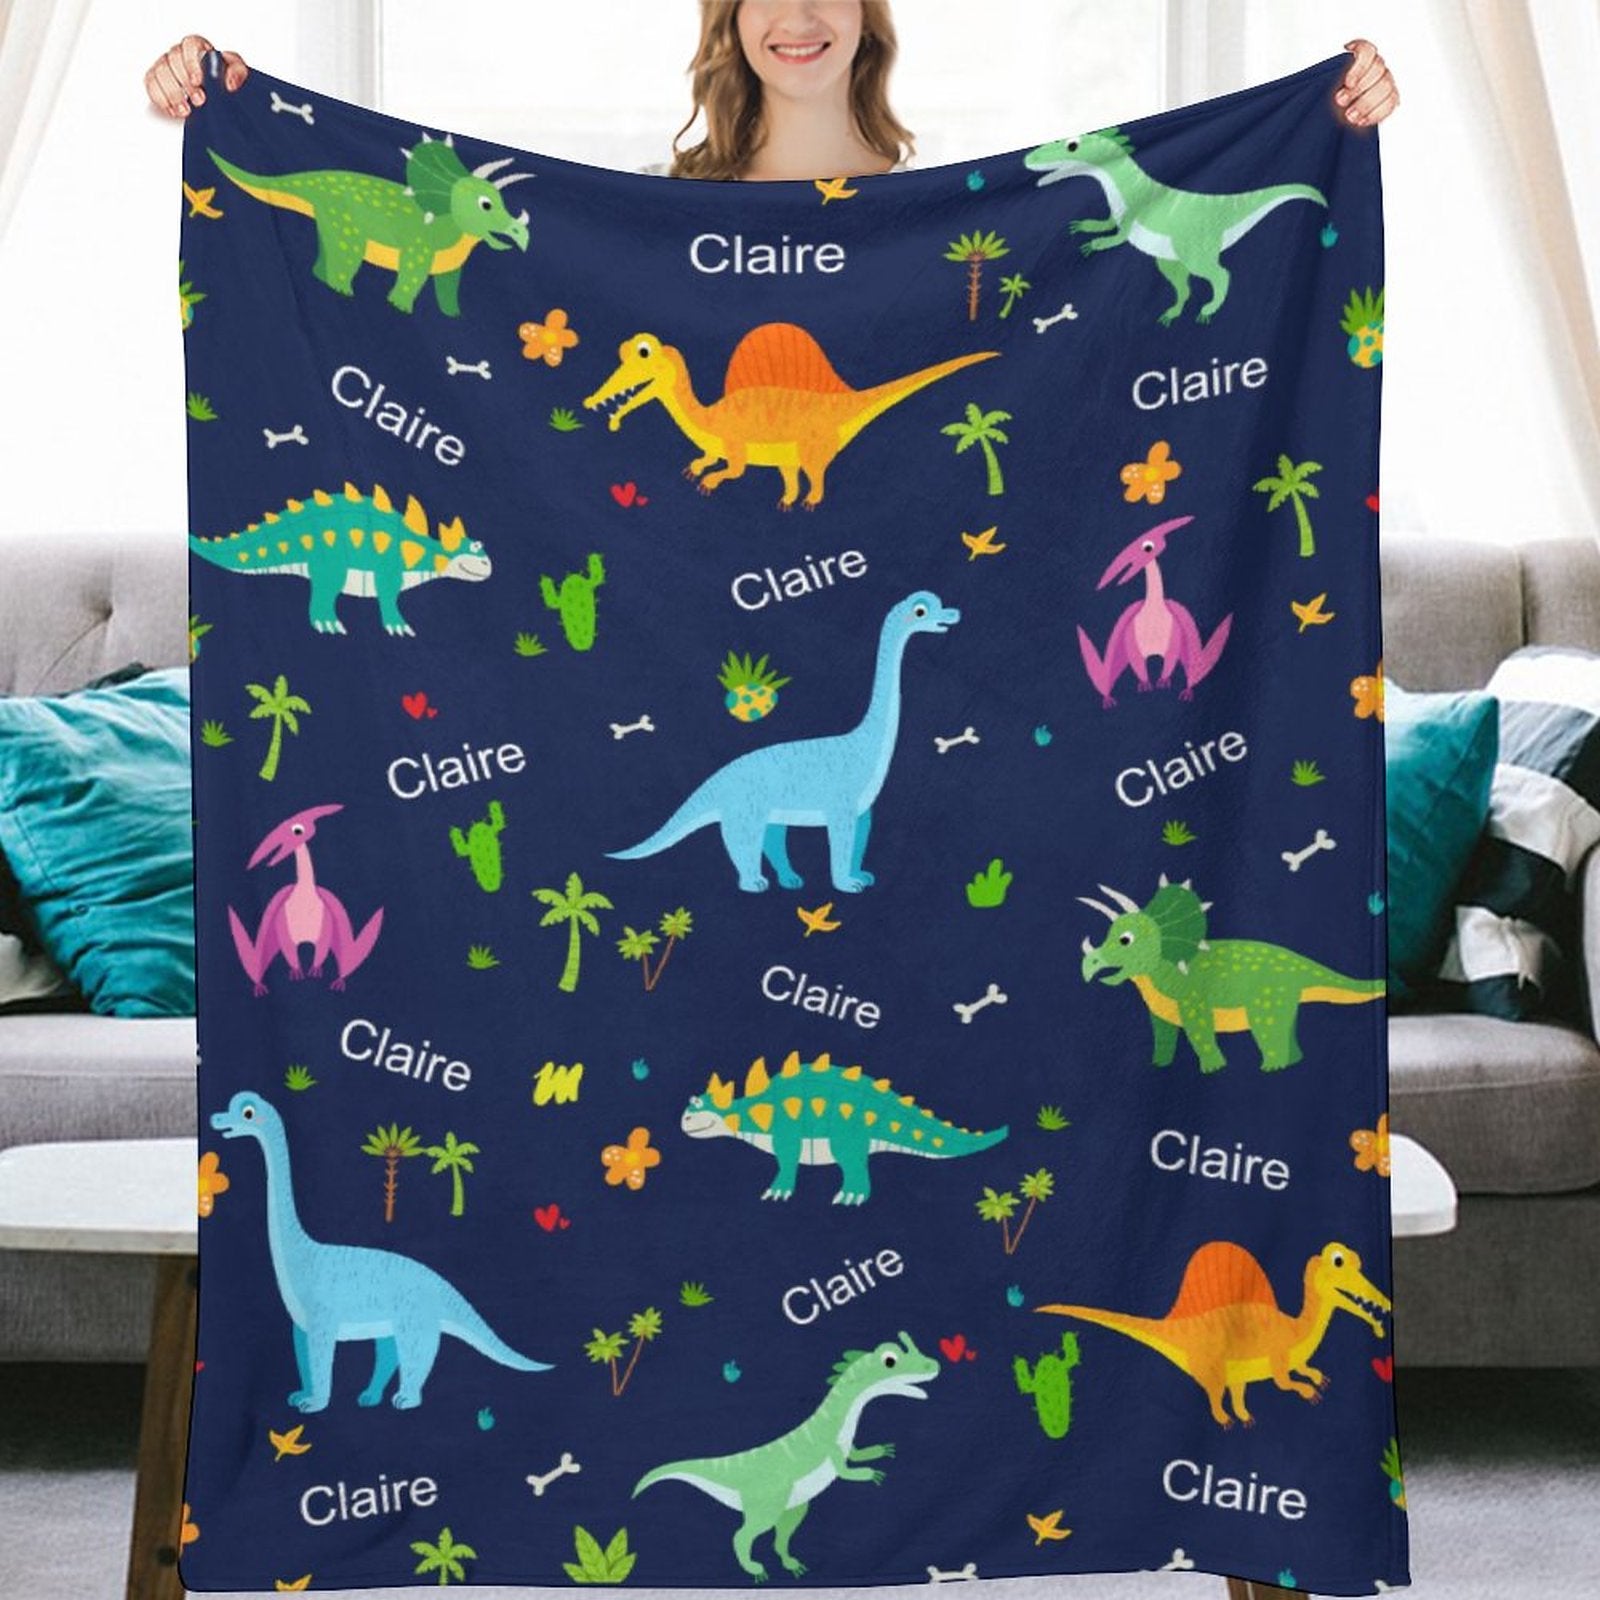 Personalized Name Baby Blankets with Dinosaur Design for Kids Toddlers - Customized Blanket Gifts for Birthday Christmas